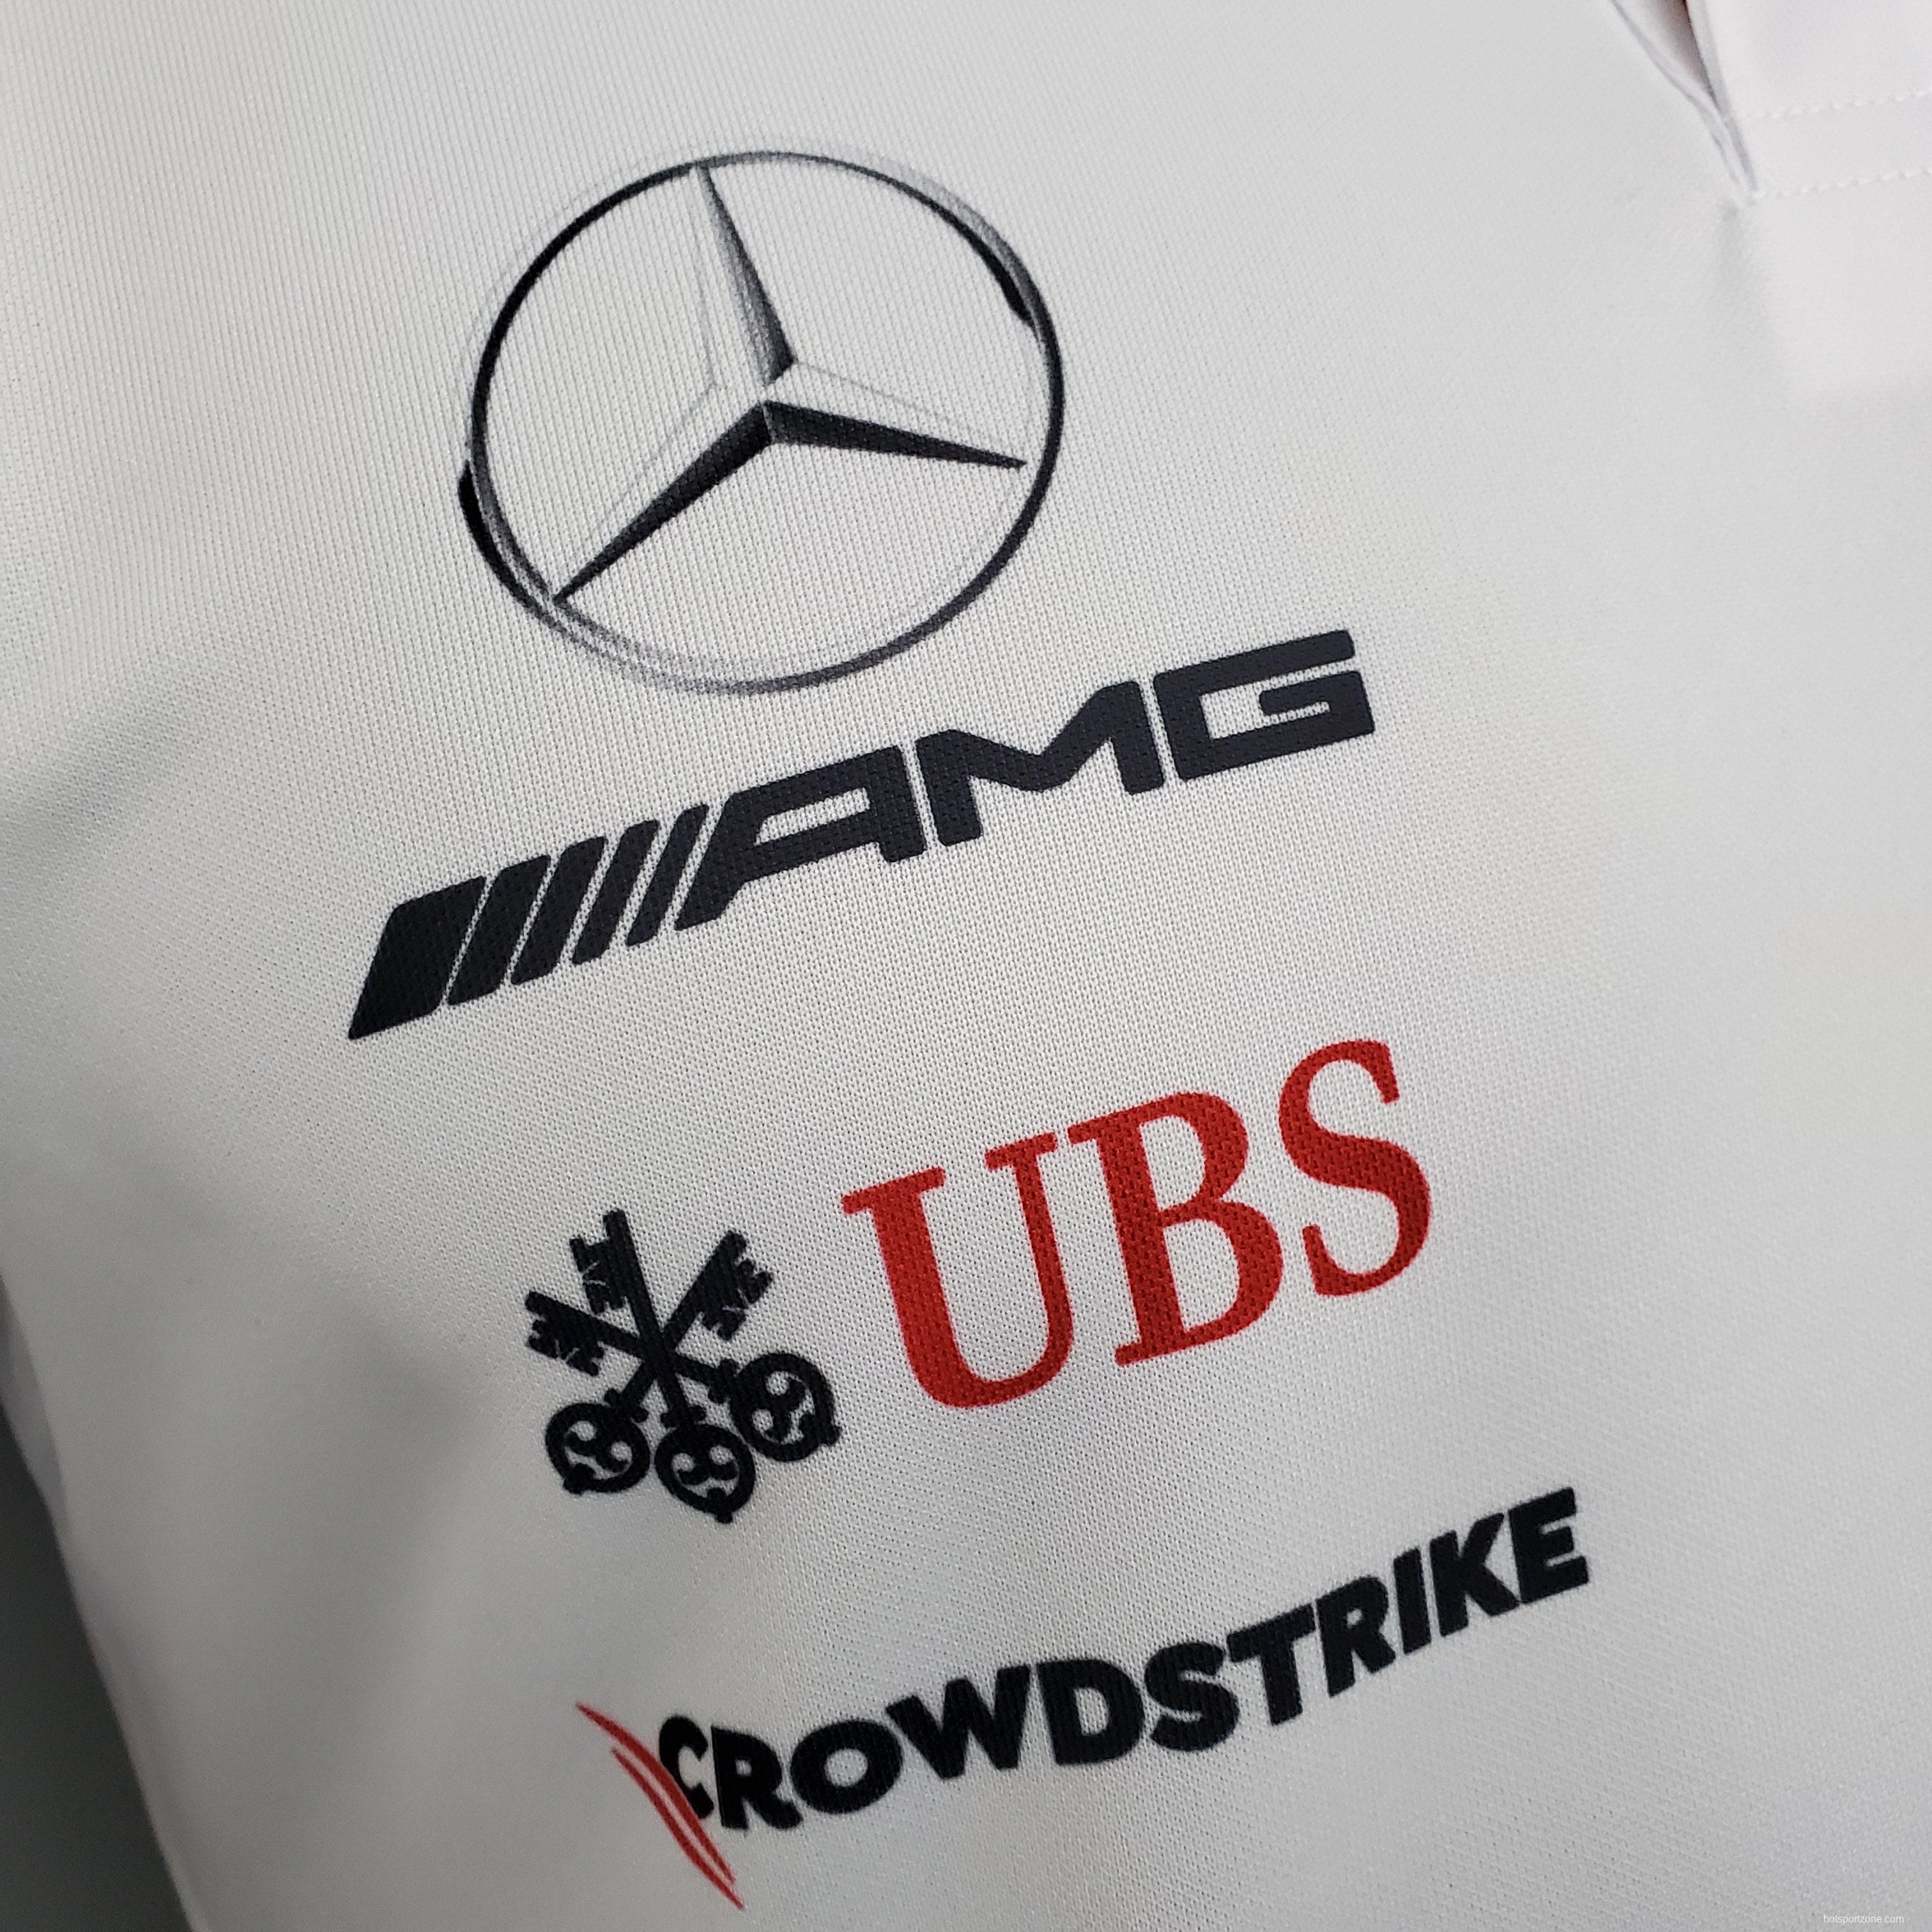 F1 Formula One racing suit; Mercedes POLO White S-5XL